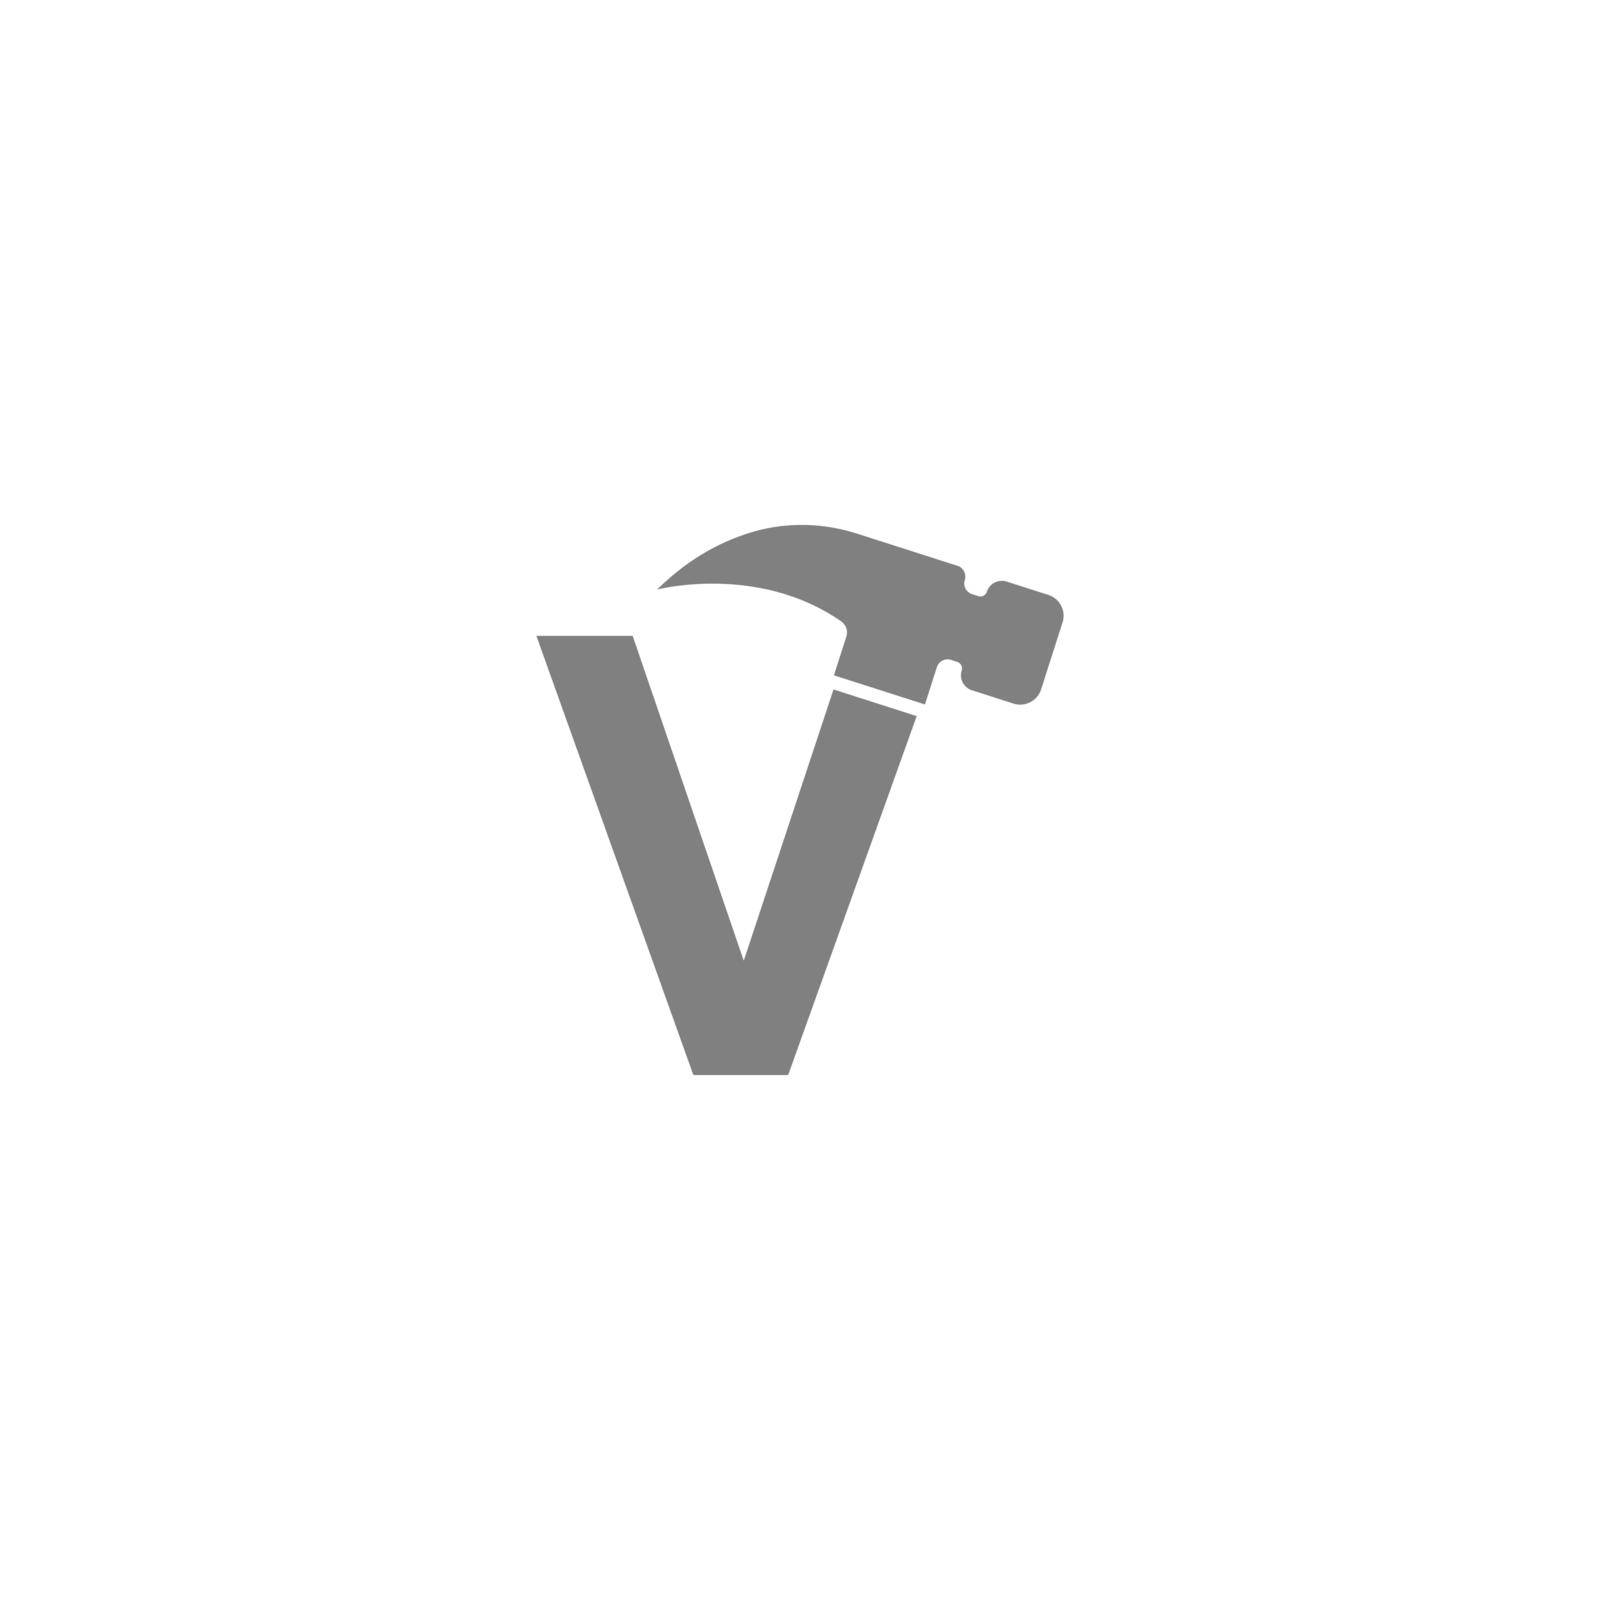 Letter V and hammer combination icon logo design by bellaxbudhong3